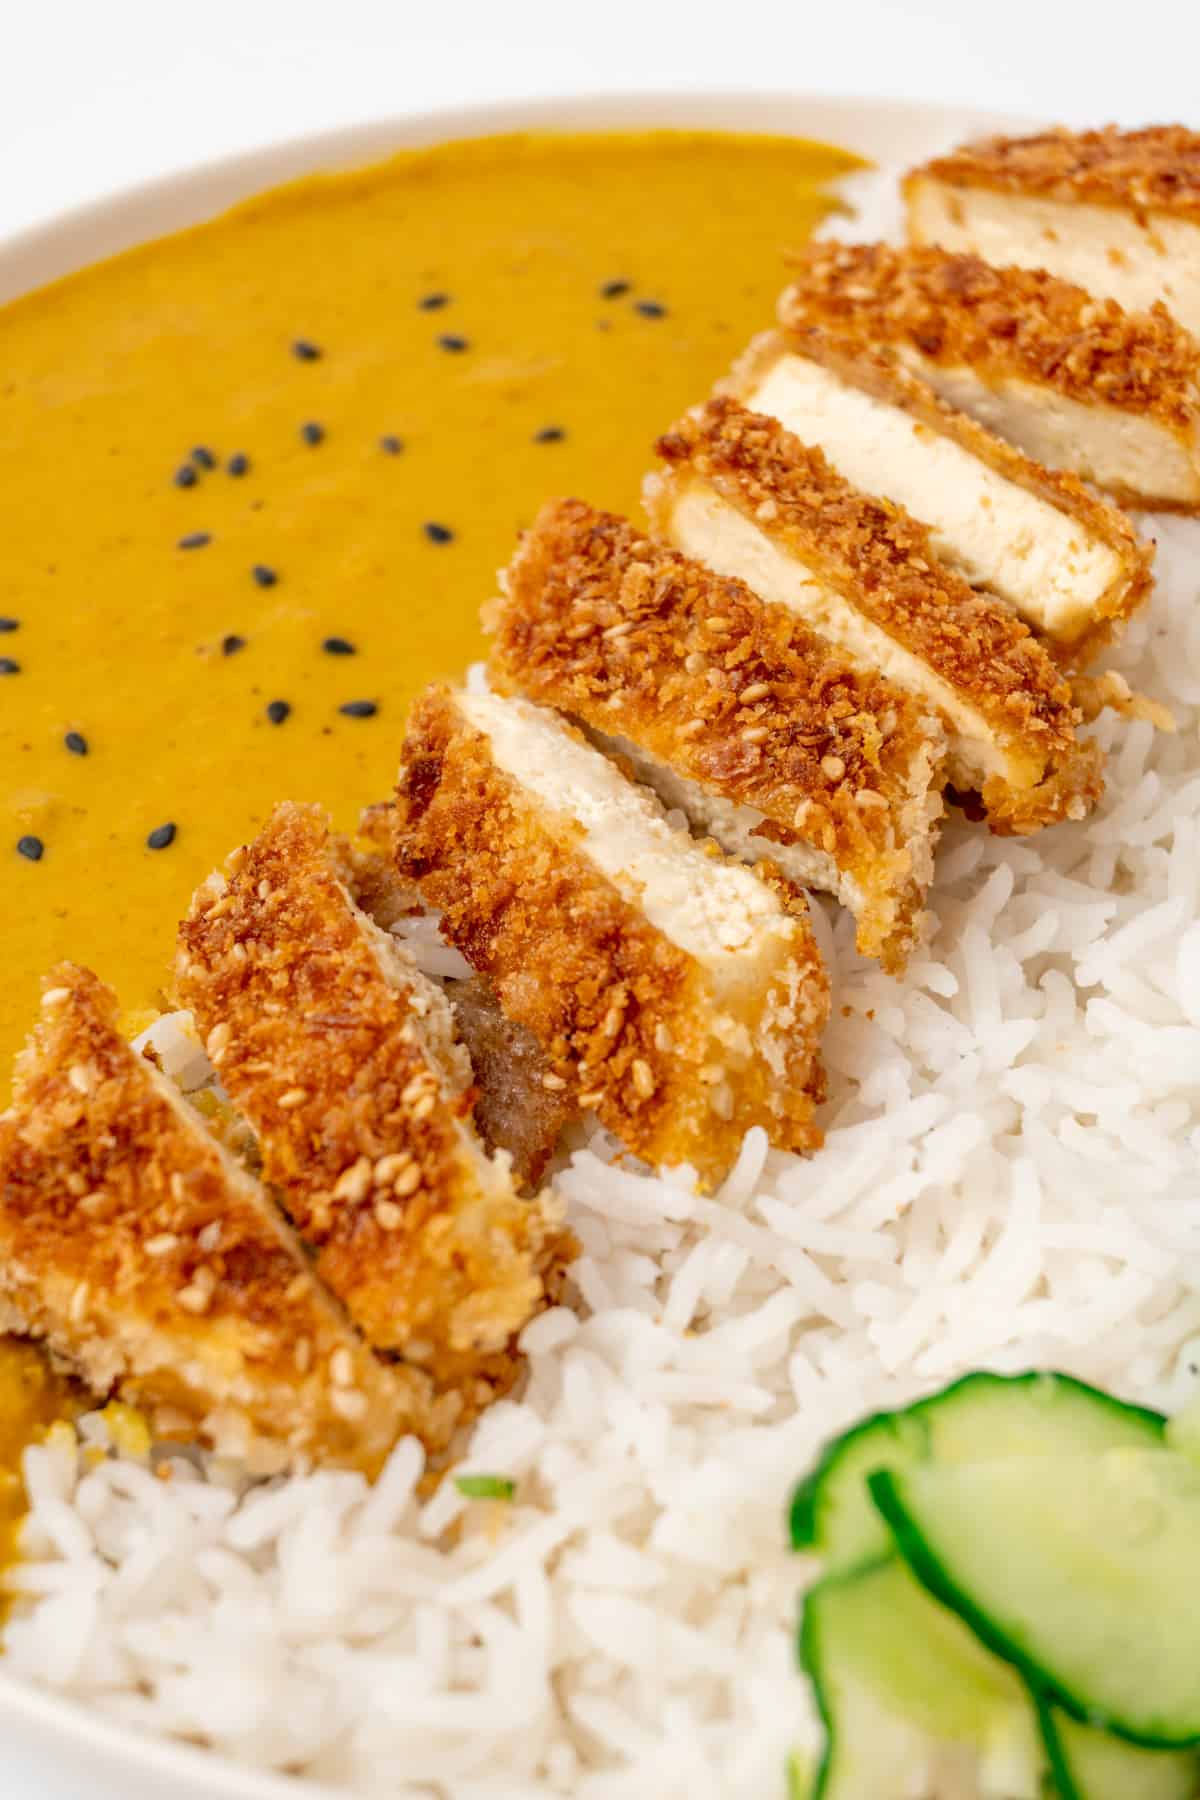 Slices of tofu cutlet on top of rice, with a Japanese curry sauce.